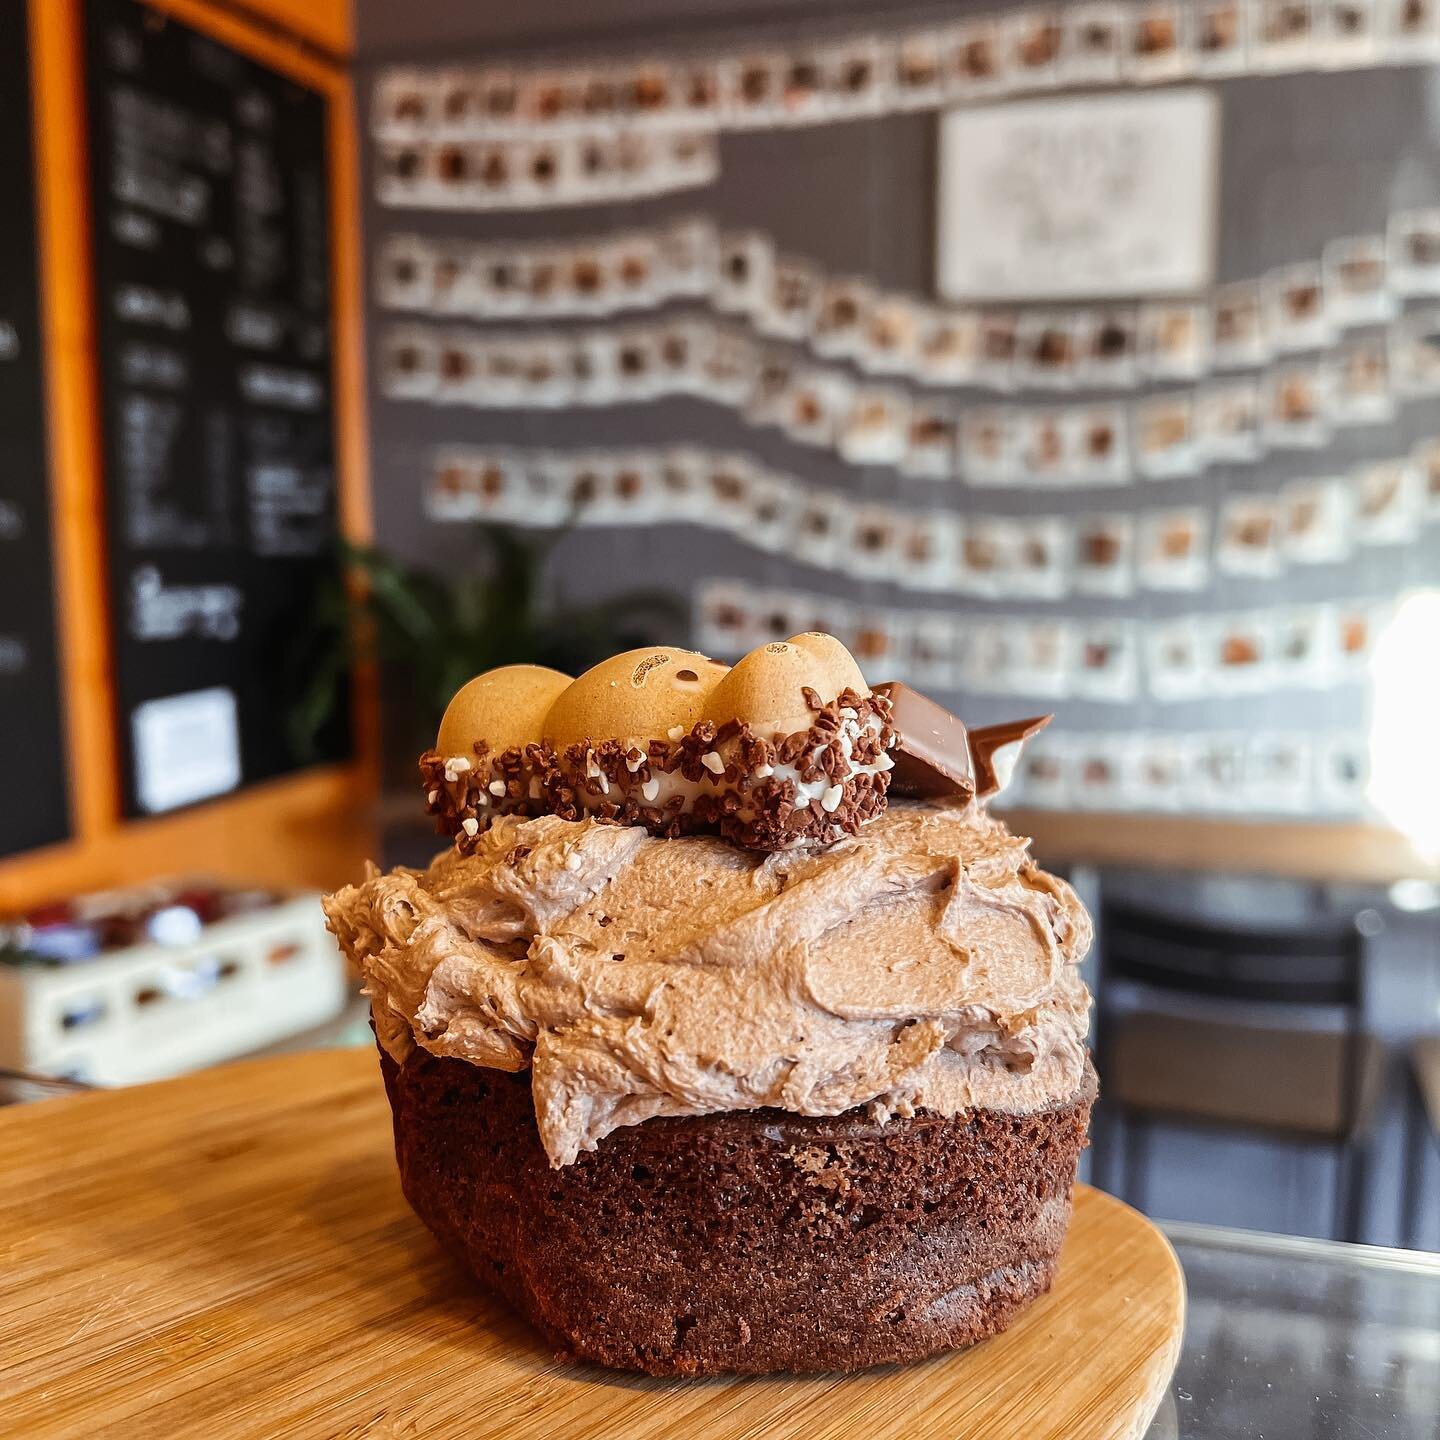 Chocolate ganache stuffed chocolate cake topped with light + fluffy chocolate buttercream and chocolate pieces, plus a little Hippo for good measure. Is that enough chocolate?
&bull;
#chocoholic #chocolatecake #chocolatelover #f52grams #bakery #bakeh